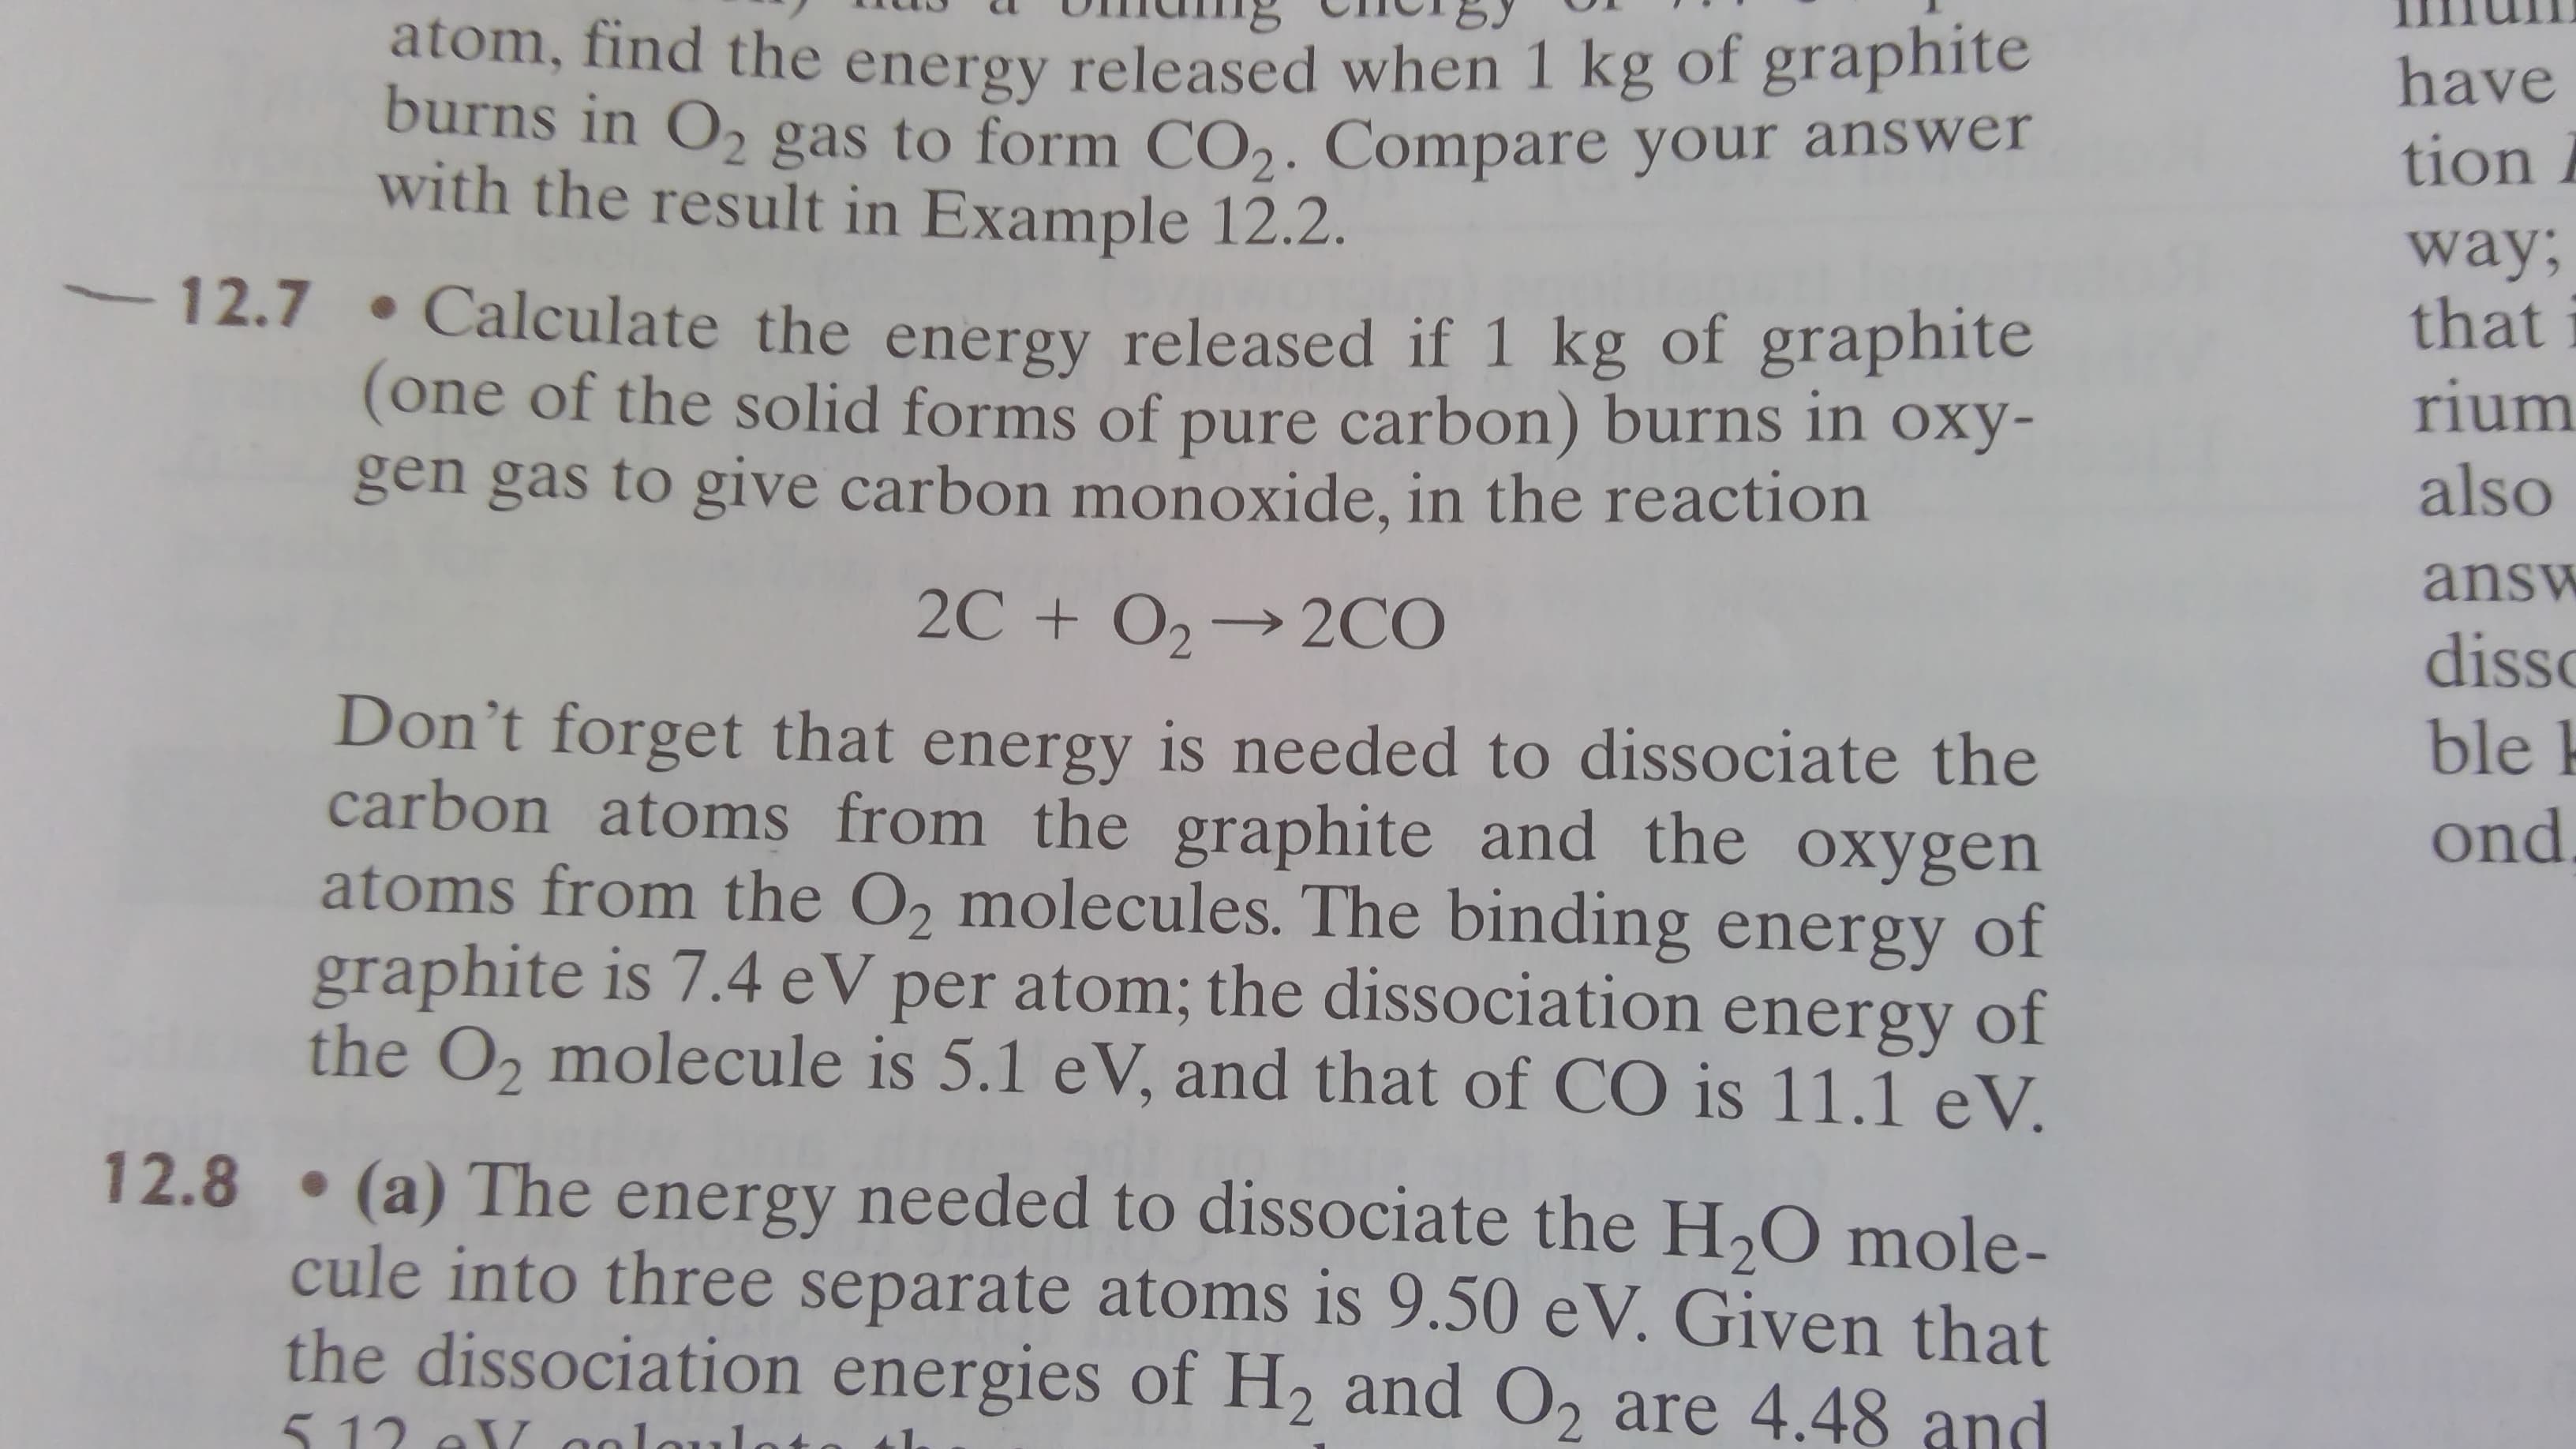 atom, find the energy released when 1 kg of graphite
burns in O, gas to form CO,. Compare your answer
with the result in Example 12.2.
have
tion i
way;
that
12.7 • Calculate the energy released if 1 kg of graphite
(one of the solid forms of pure carbon) burns in oxy-
gen gas to give carbon monoxide, in the reaction
rium
also
answ
2C + 0,→ 2CO
disso
ble k
Don't forget that energy is needed to dissociate the
carbon atoms from the graphite and the oxygen
atoms from the O, molecules. The binding energy of
graphite is 7.4 eV per atom; the dissociation energy of
the O, molecule is 5.1 eV, and that of CO is 11.1 eV.
ond
12.8 • (a) The energy needed to dissociate the H,O mole-
cule into three separate atoms is 9.50 eV. Given that
the dissociation energies of H2 and O2 are 4.48 and
